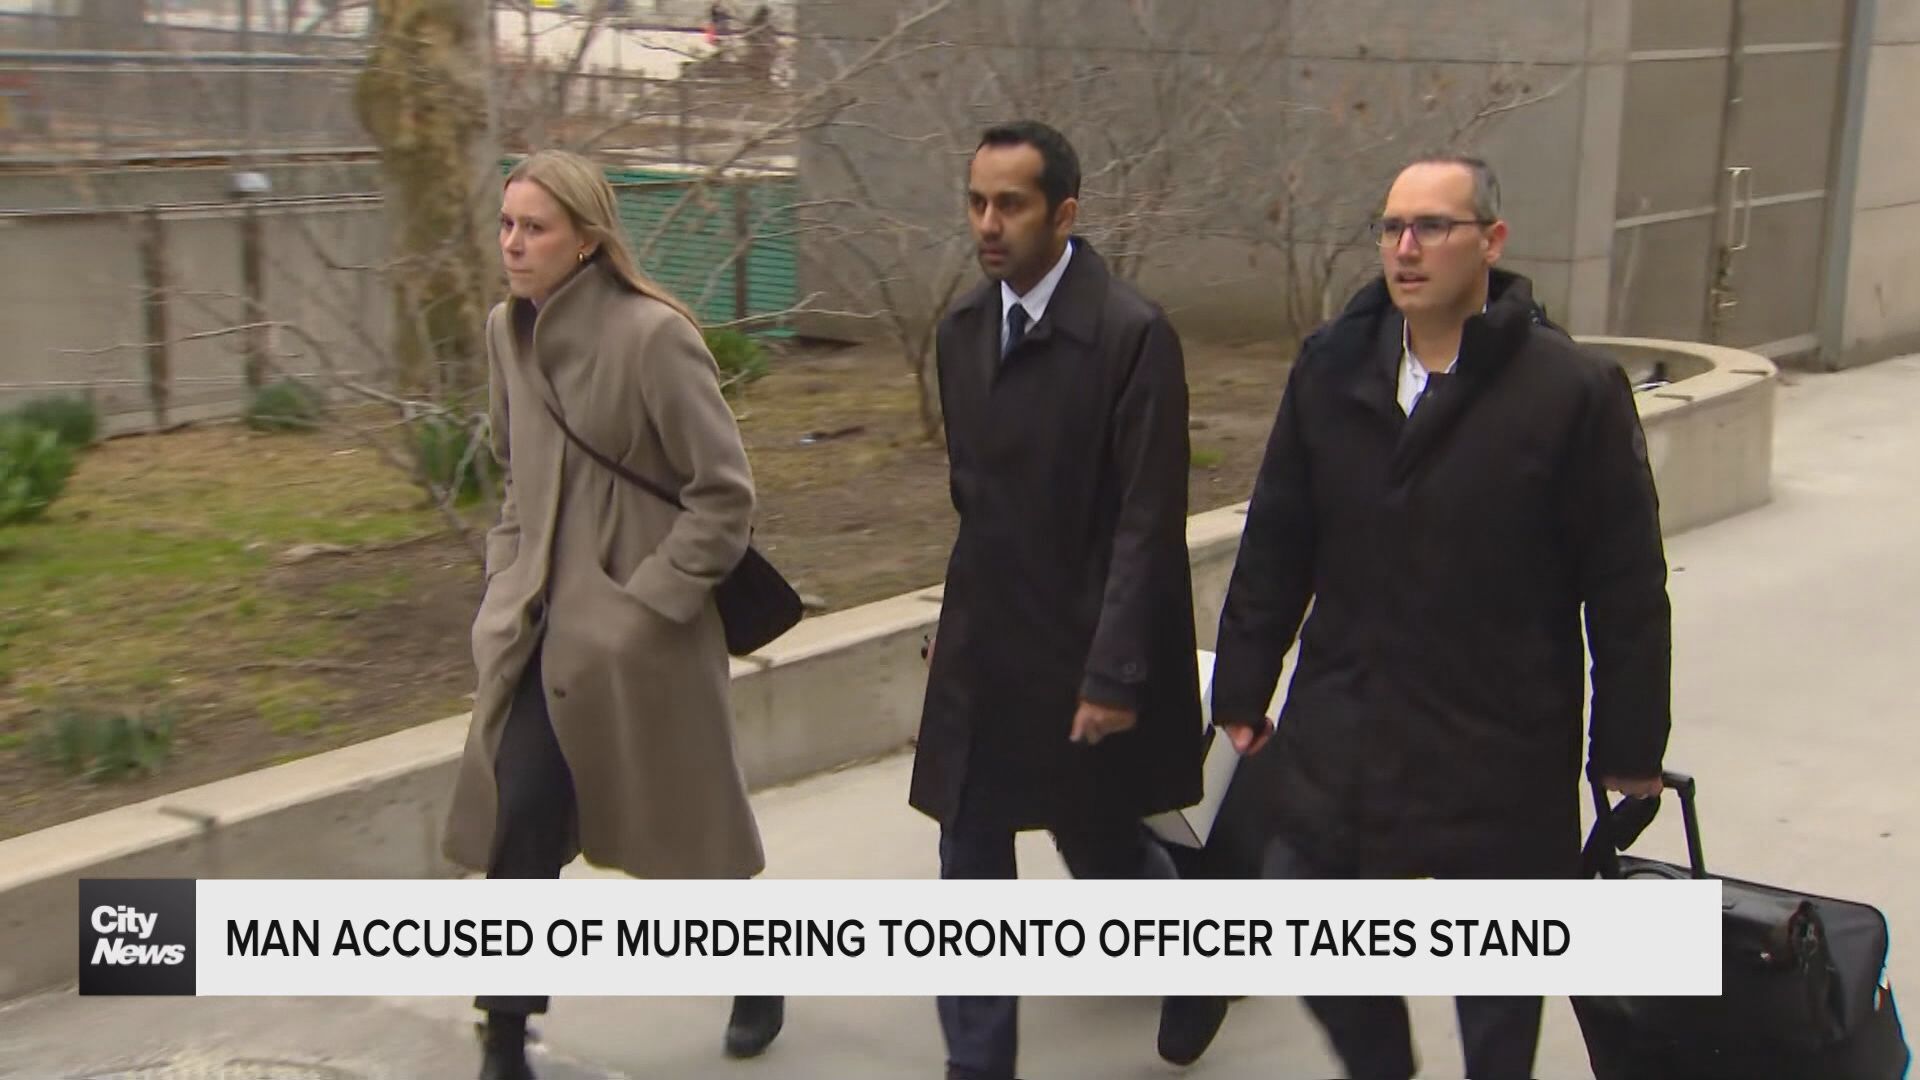 Man accused of murdering Toronto officer takes stand